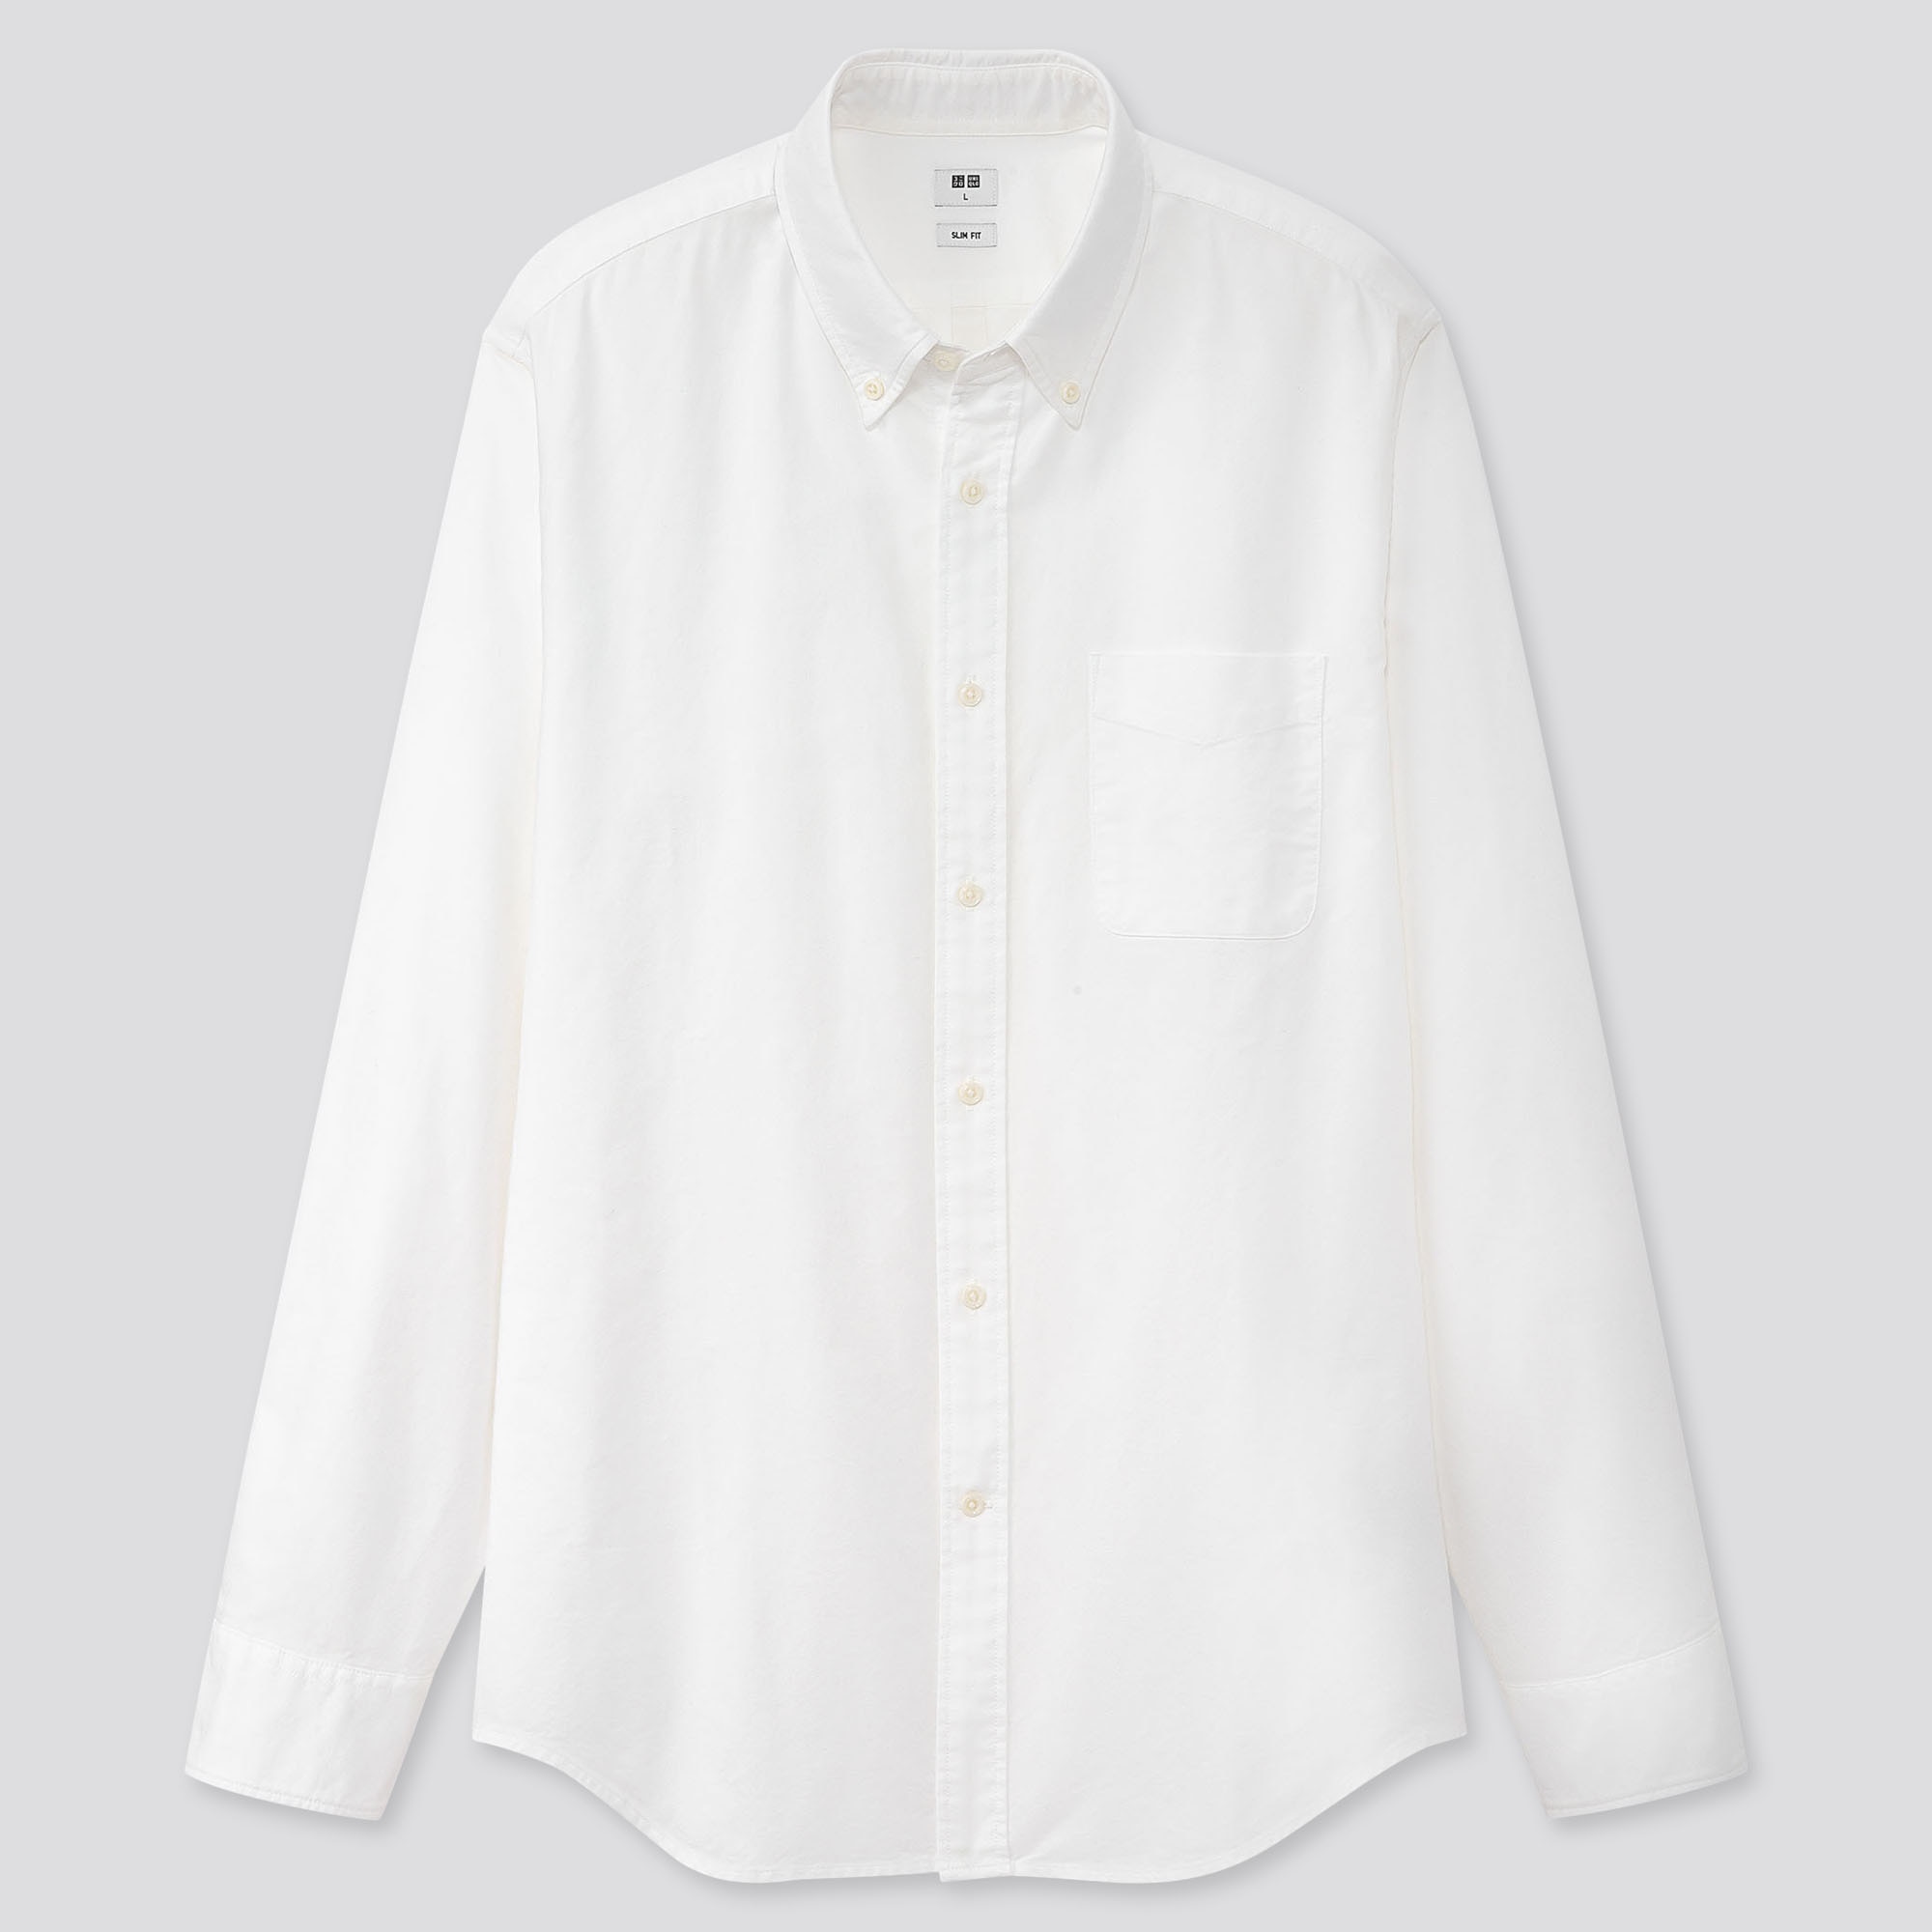 Buy > slim fit button down dress shirts > in stock